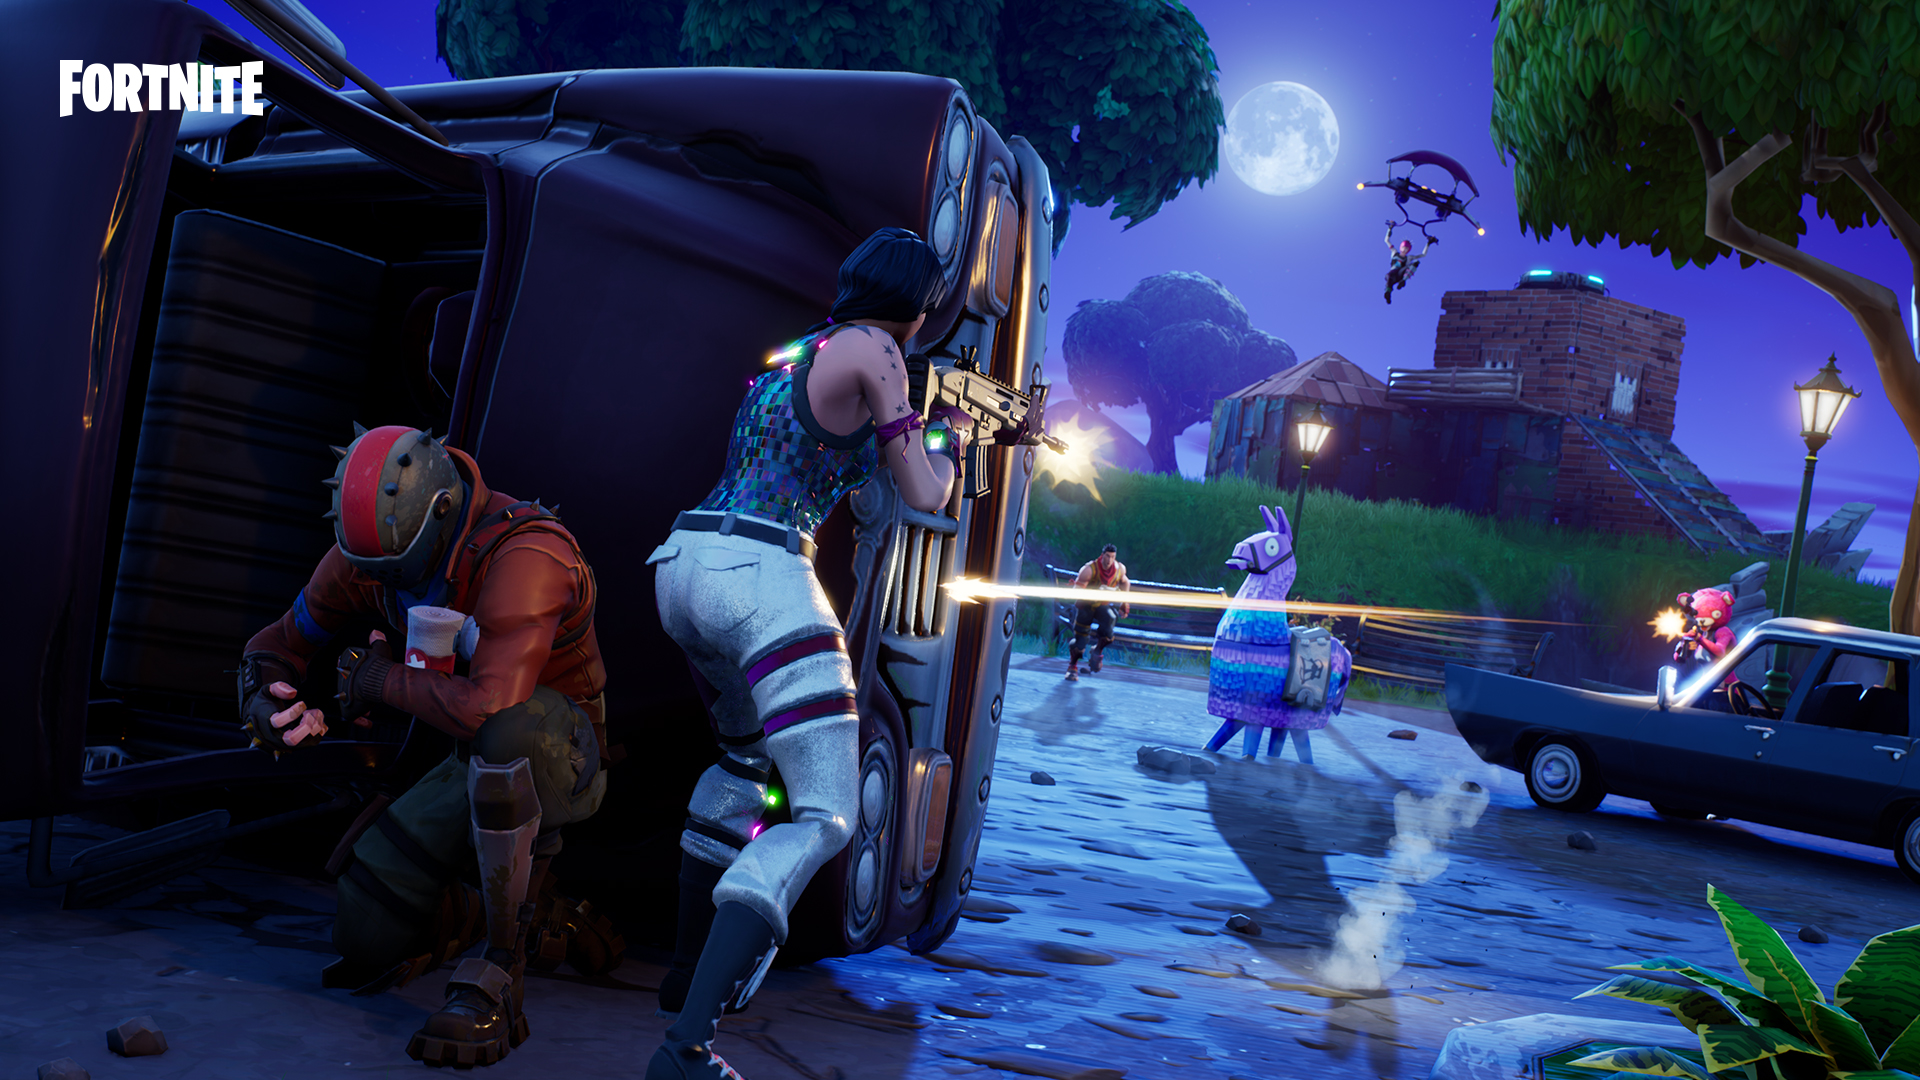 epic games 14 days of fortnite event for fortnite which played out through the holidays faced some scrutiny when the developer posted the wrong date - how to get refund tickets fortnite